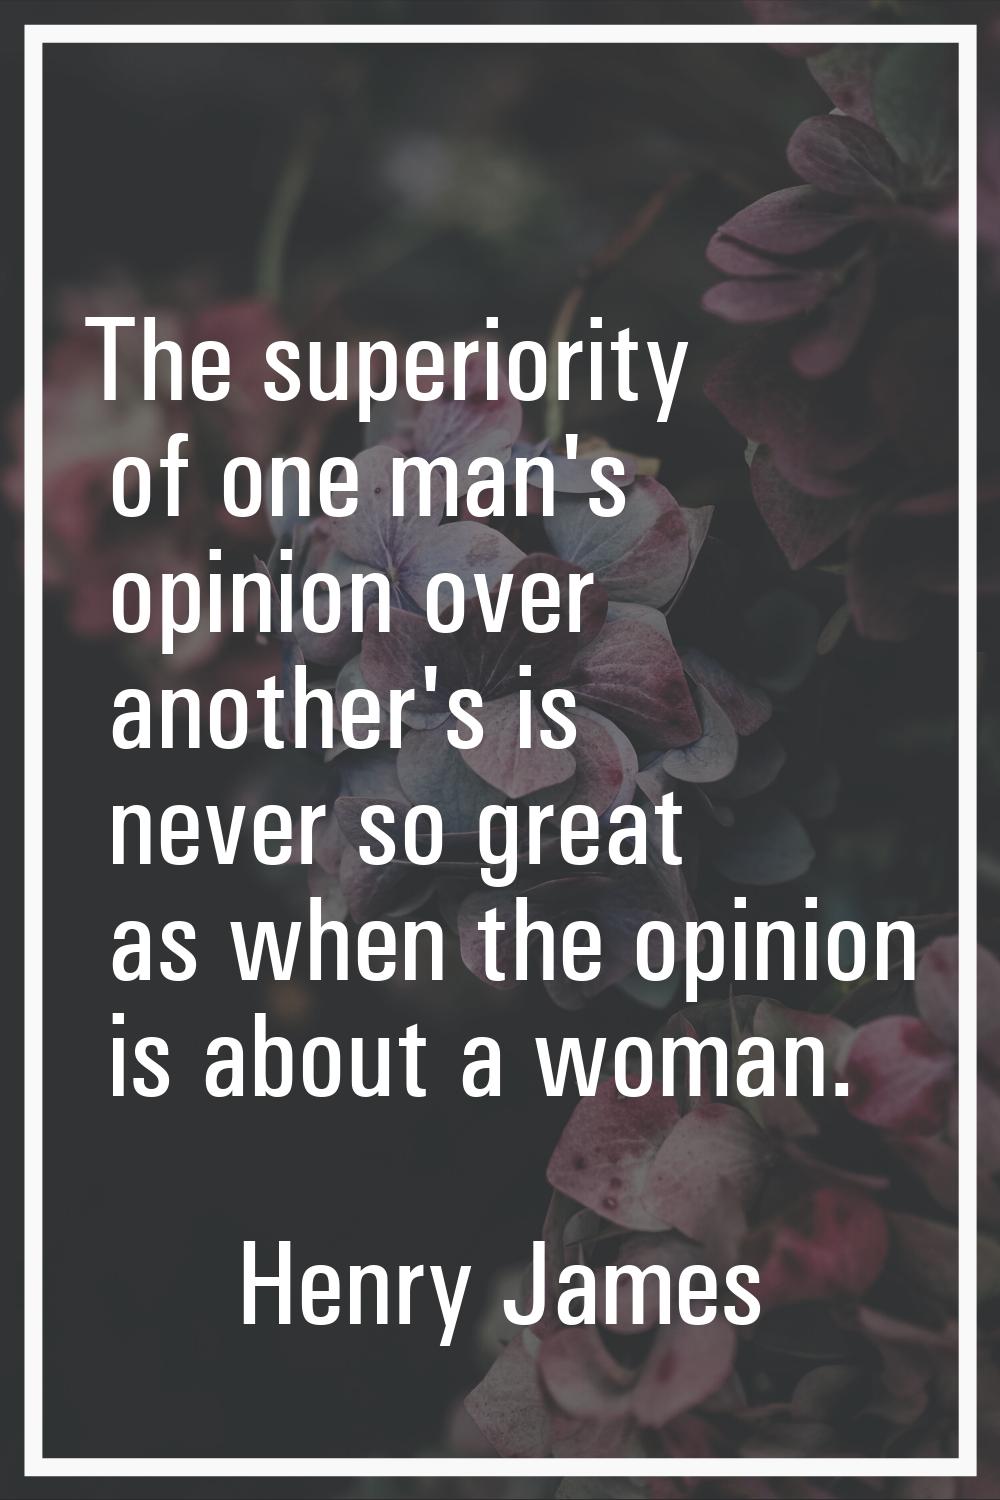 The superiority of one man's opinion over another's is never so great as when the opinion is about 